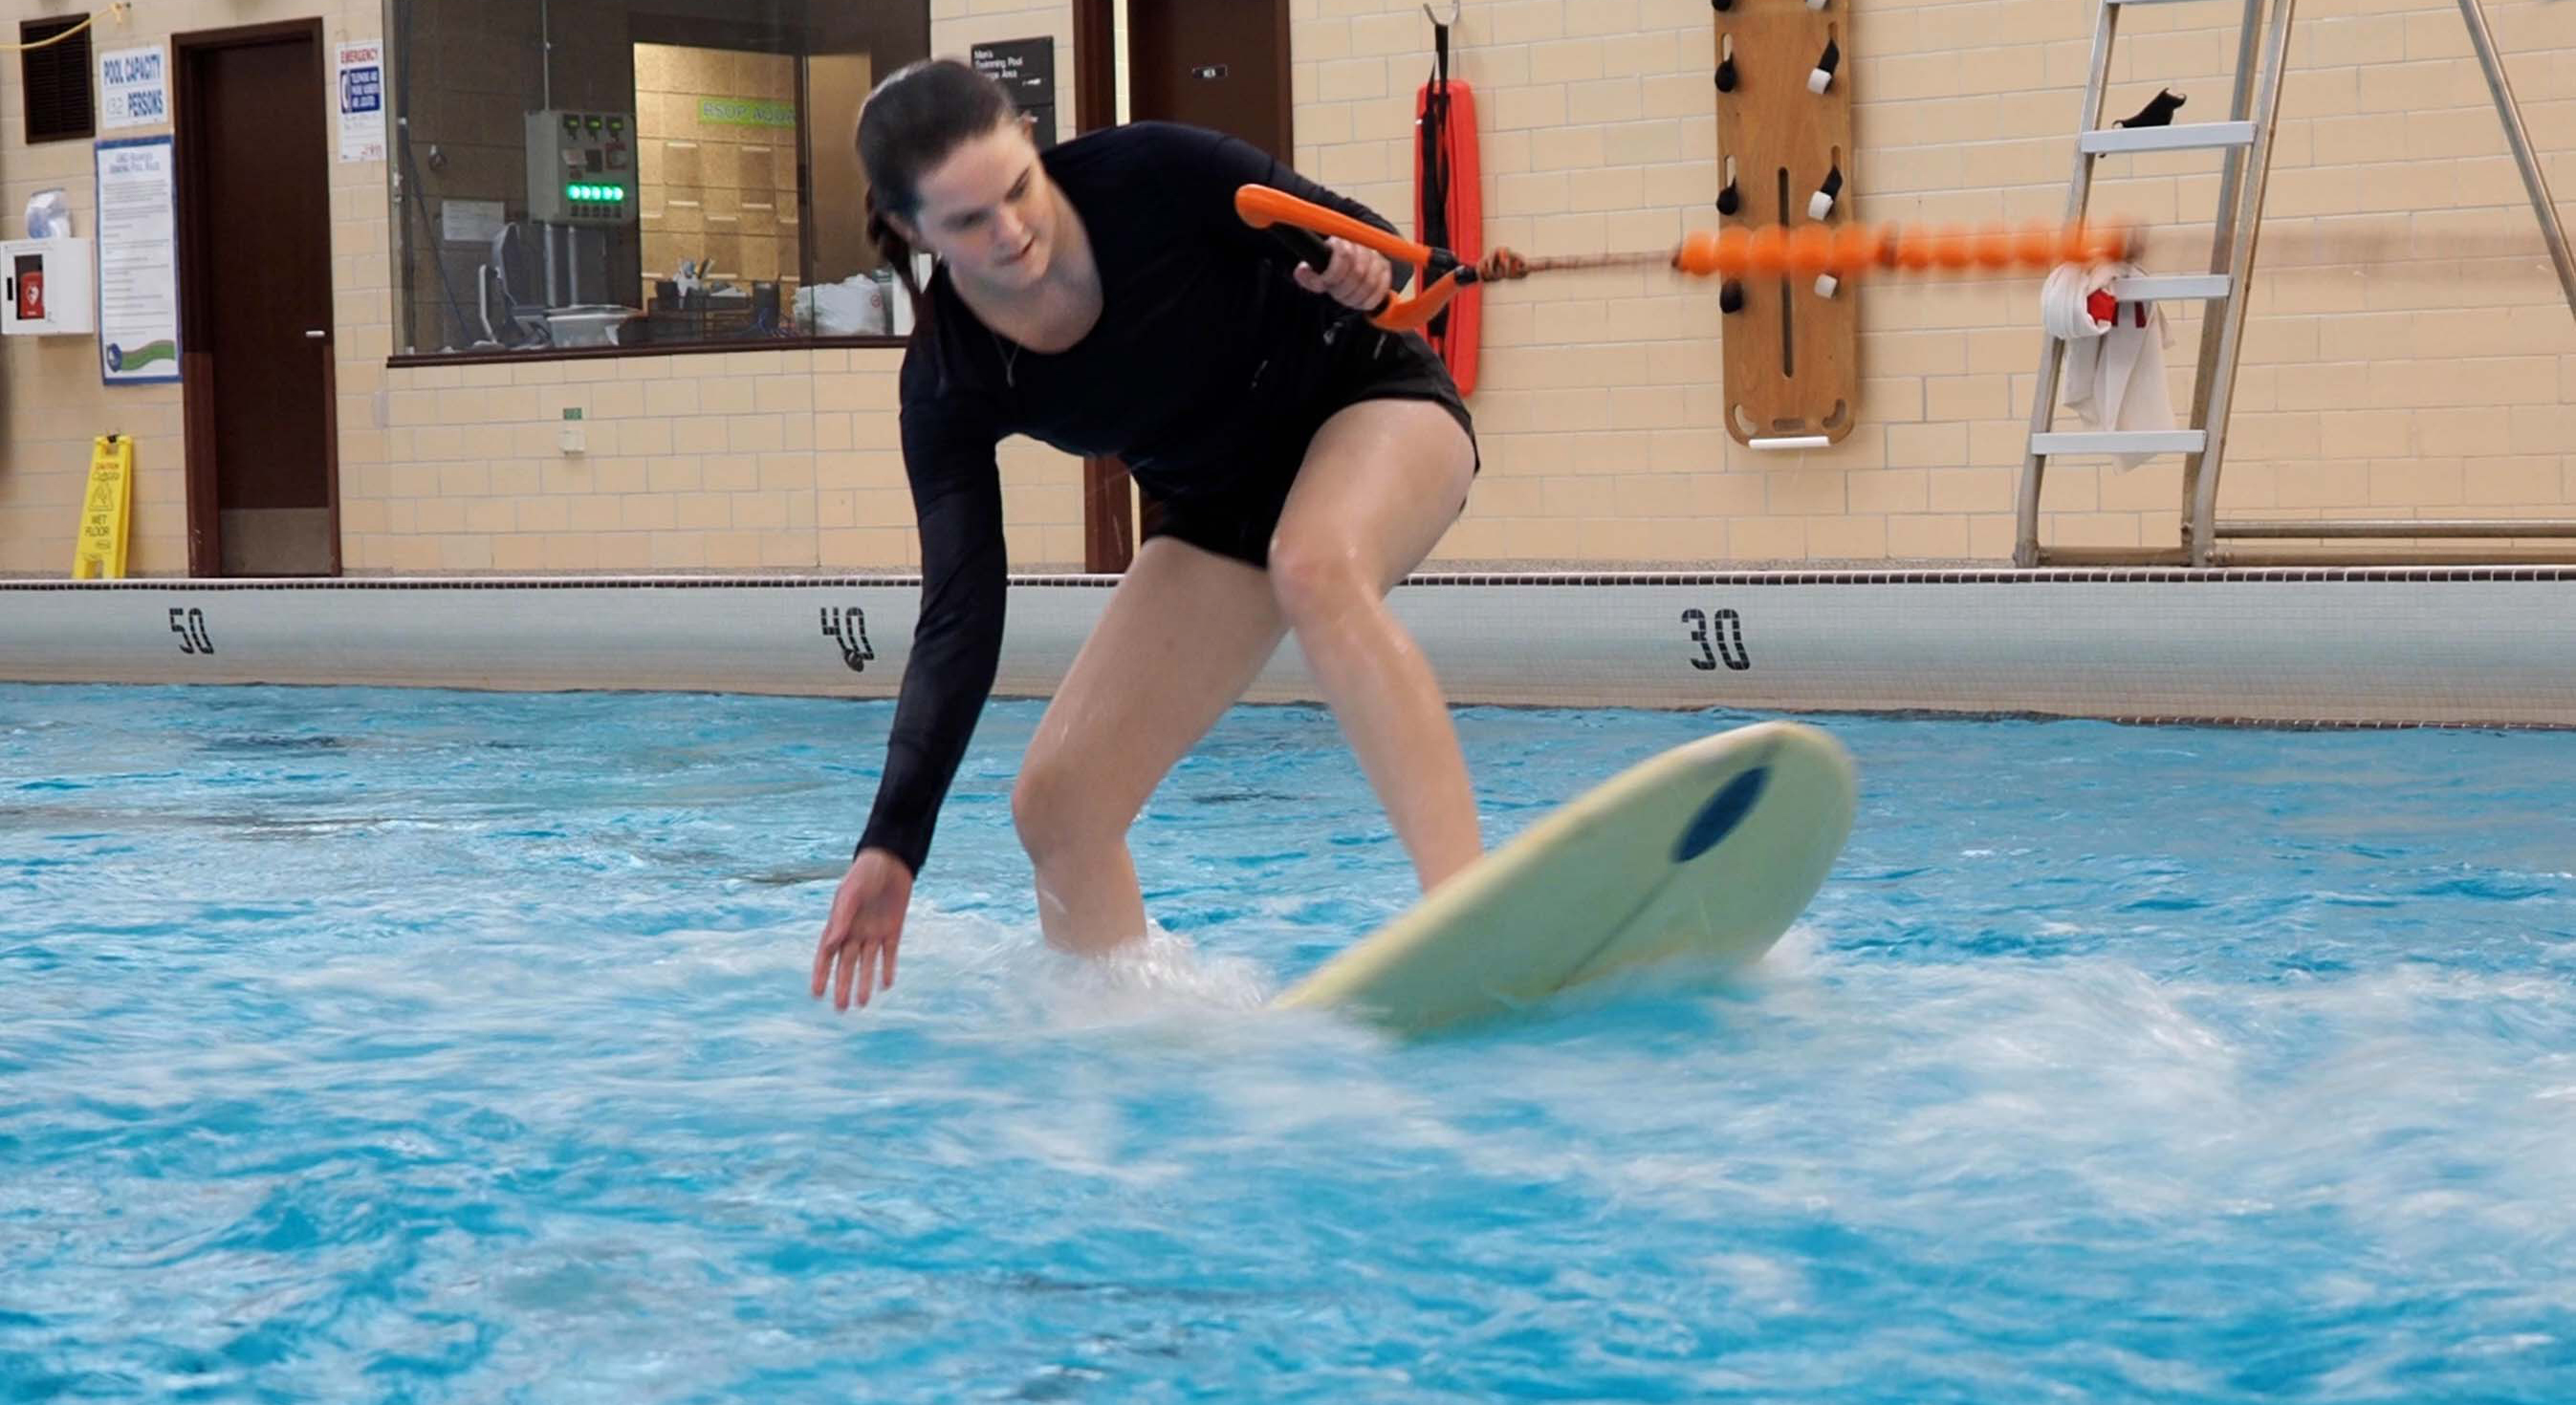 student surfing in the UMD pool